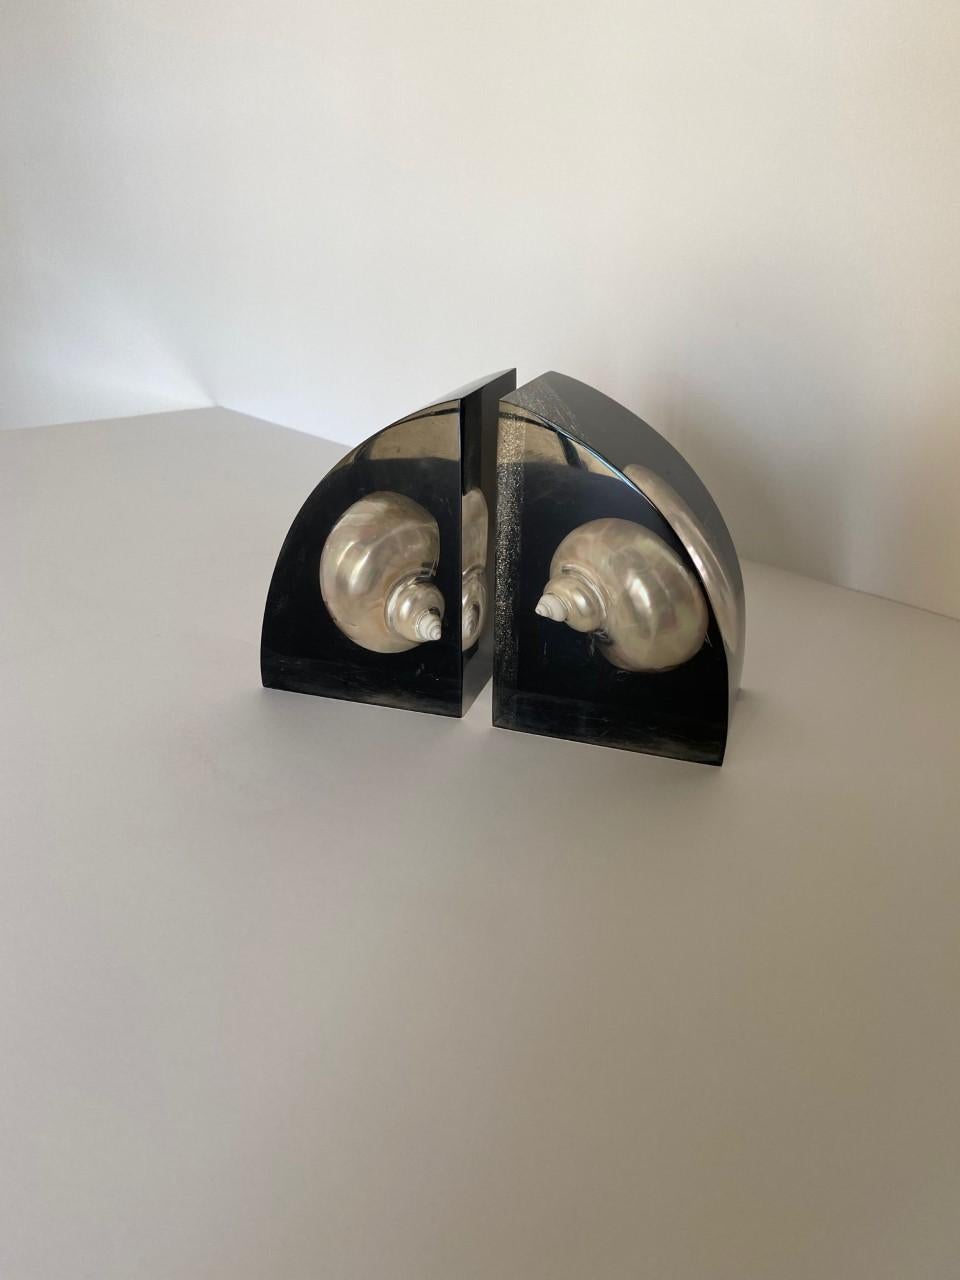 Rare Vintage Mid Century Lucite Bookends with Embedded Sea Shells In Good Condition For Sale In San Diego, CA